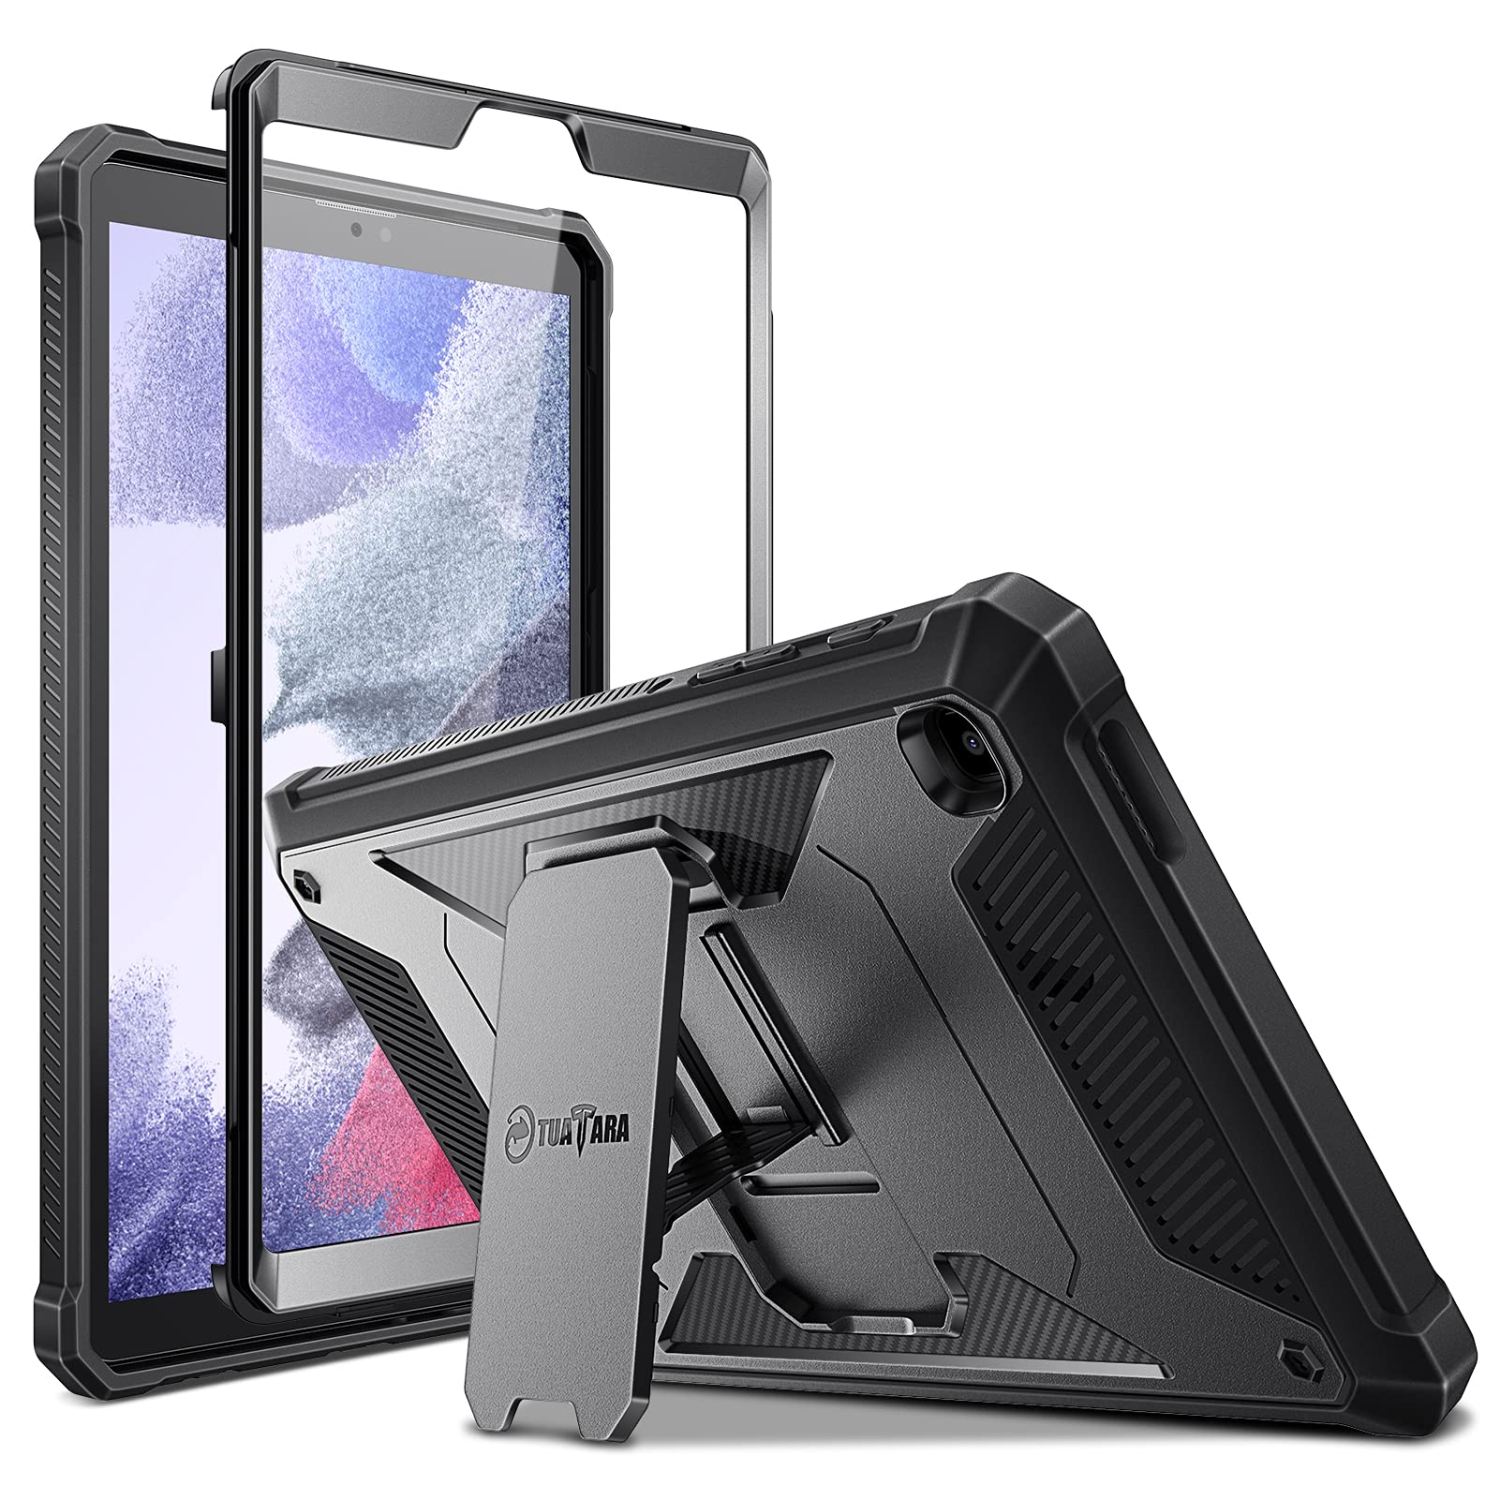 Shockproof Case for Samsung Galaxy Tab A7 Lite 8.7 inch 2021 Model (SM-T220/T225/T227), Rugged Unibody Hybrid Full Protective Bumper Kickstand Cover w/Built-in Screen Protector